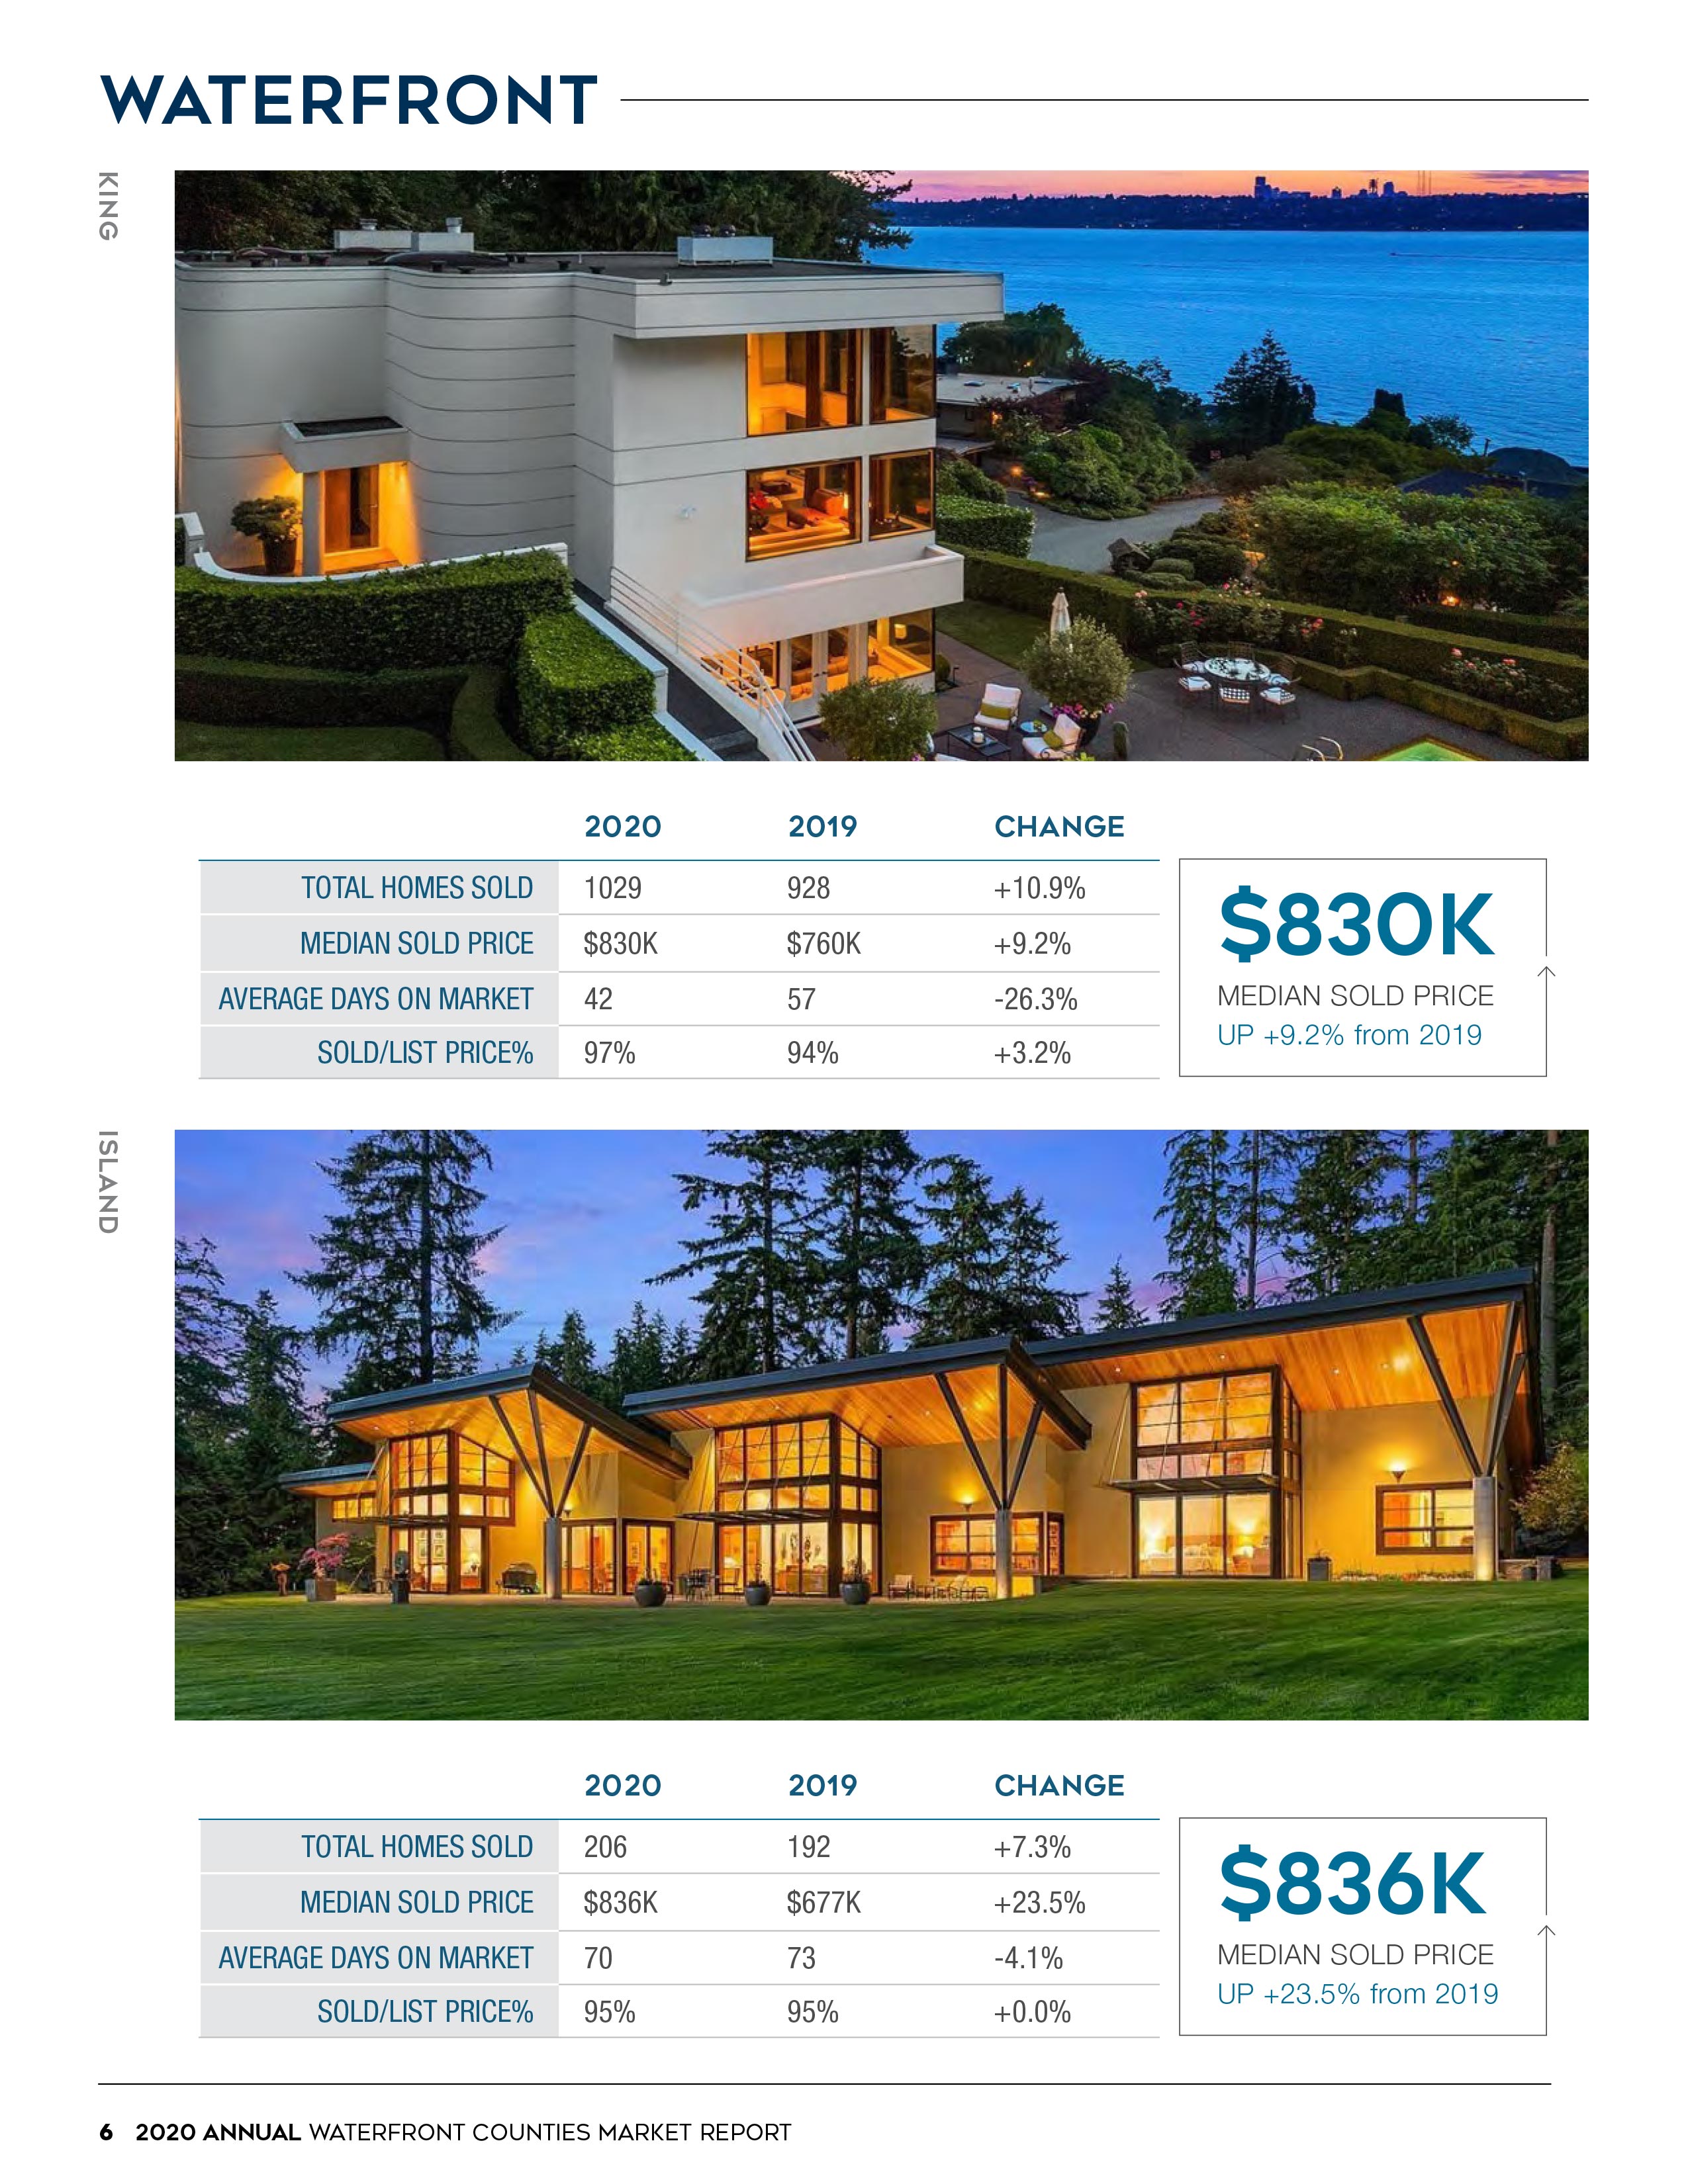 2020 Waterfront Market Update - Year in Review